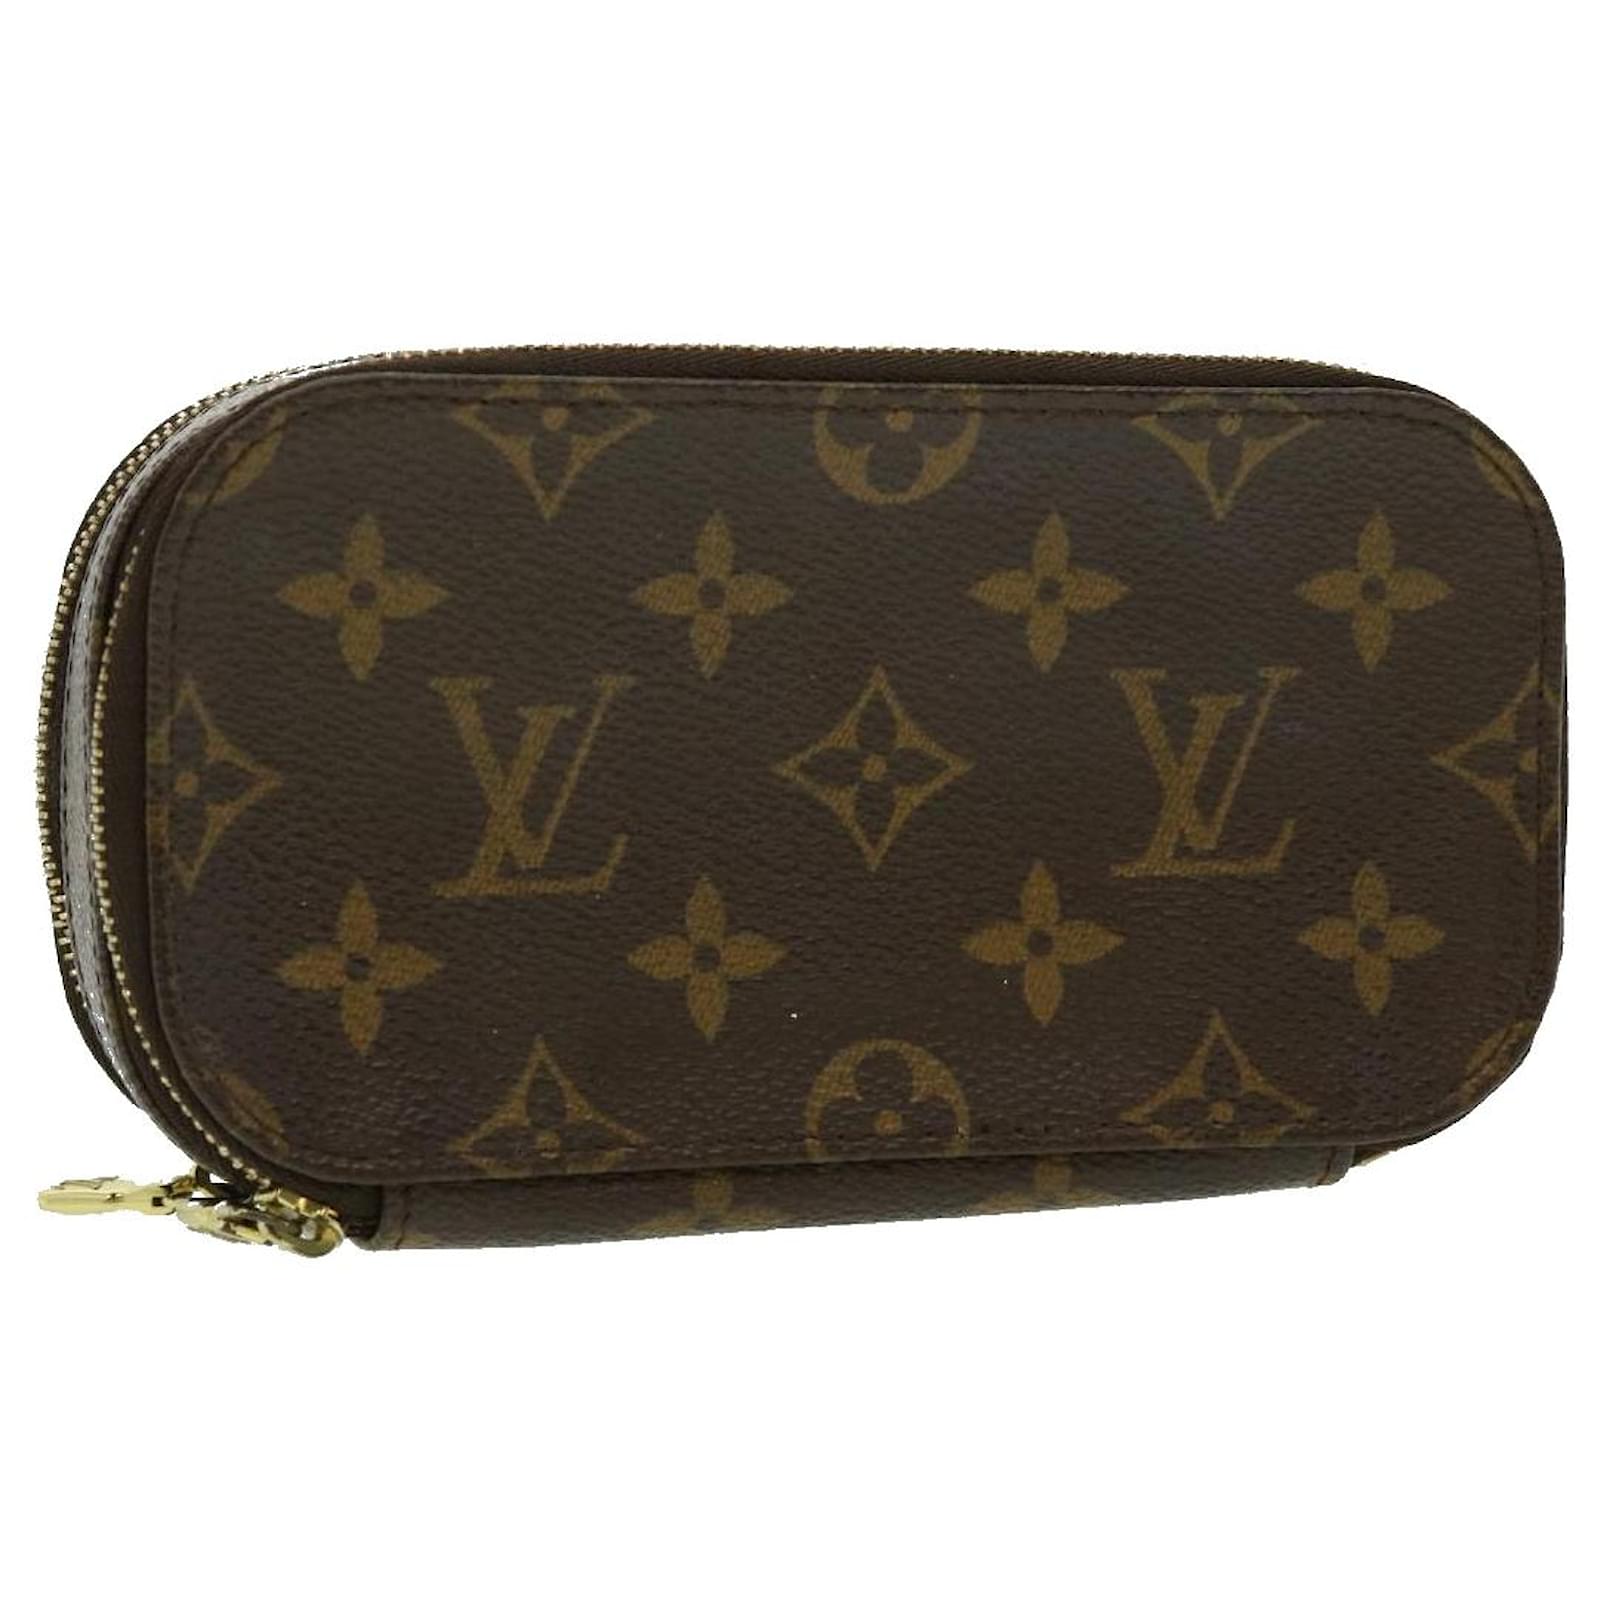 Louis Vuitton Monogram Canvas Cosmetic Pouch in Brown